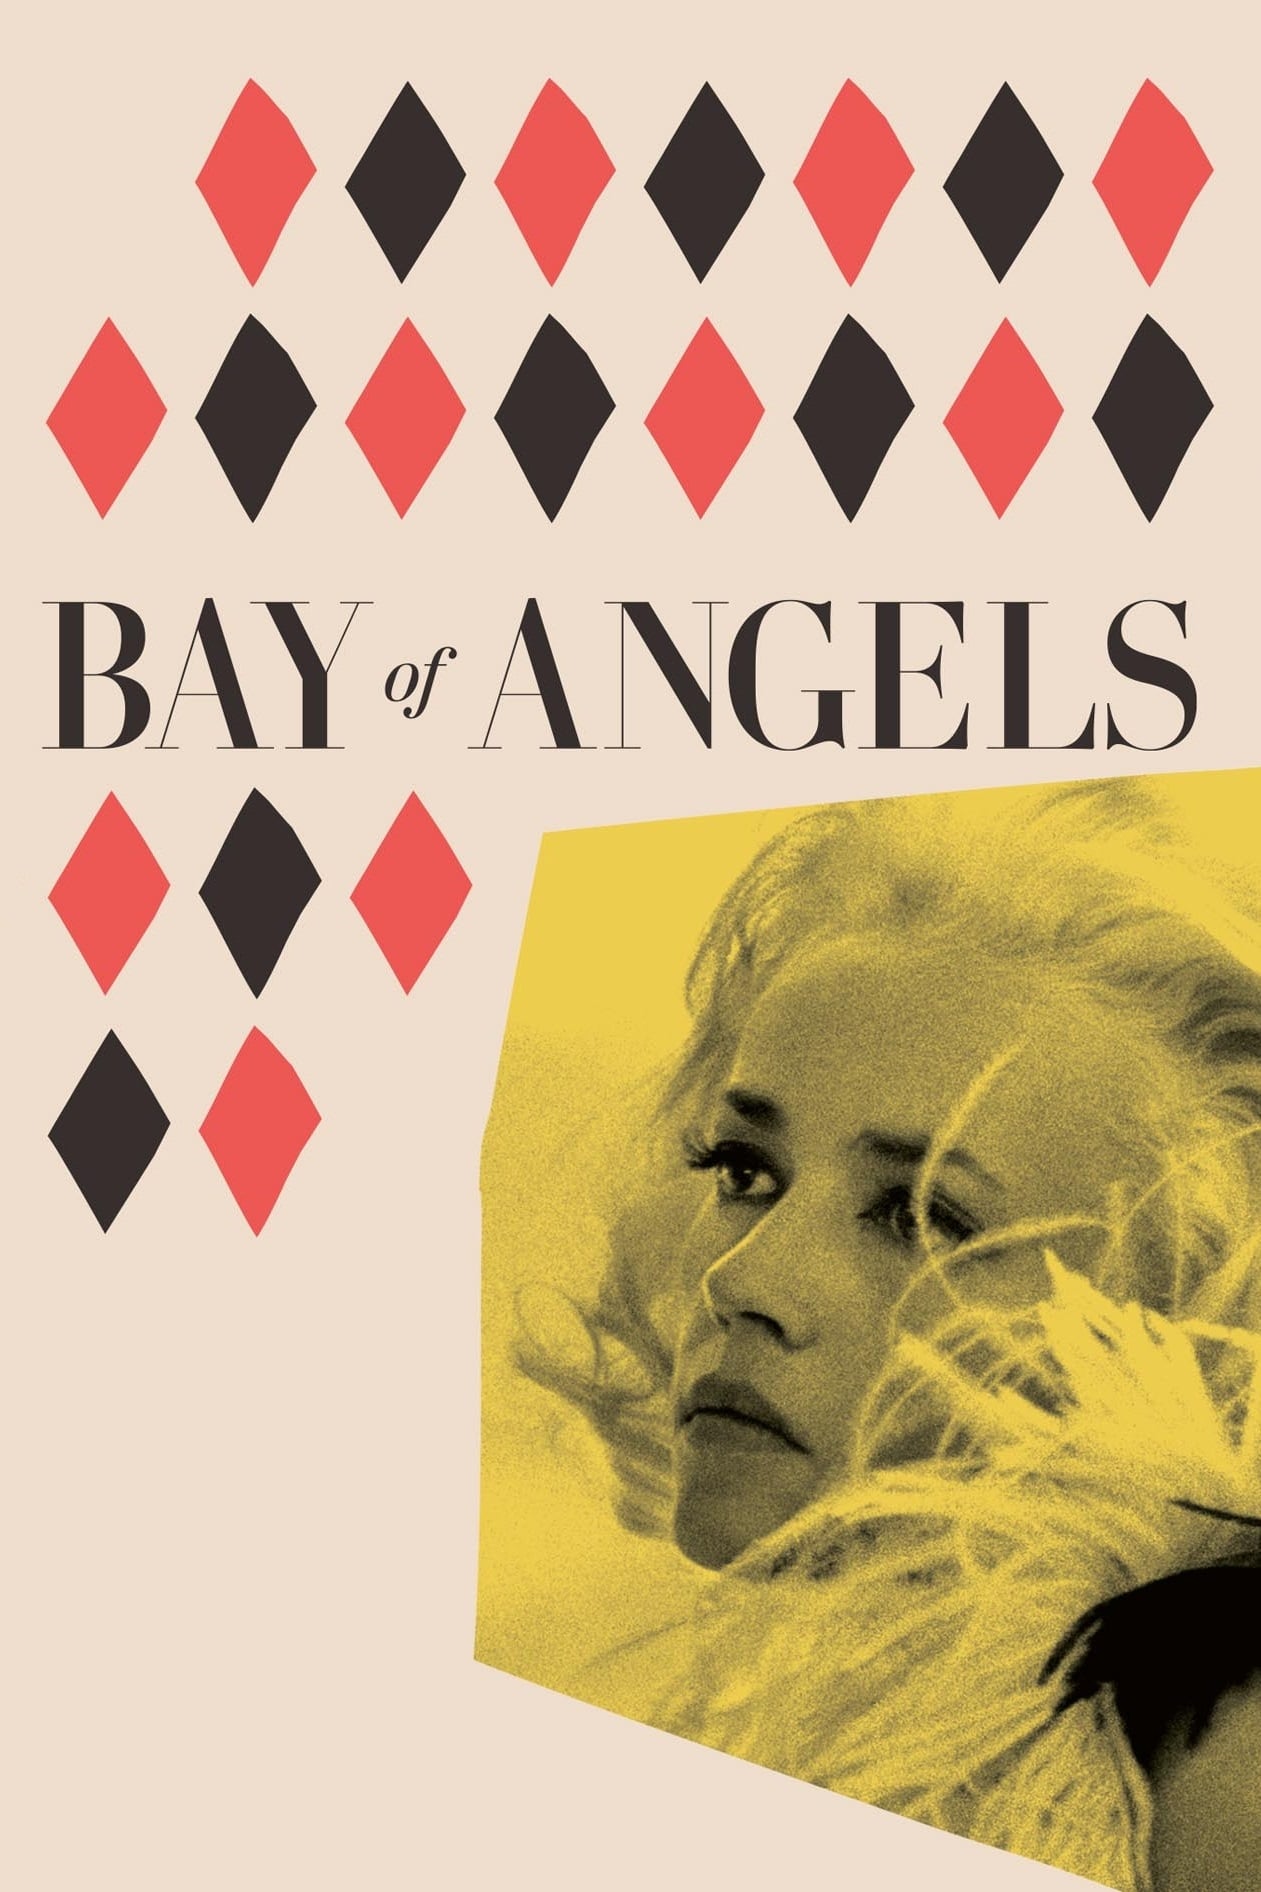 Bay of Angels (1963)